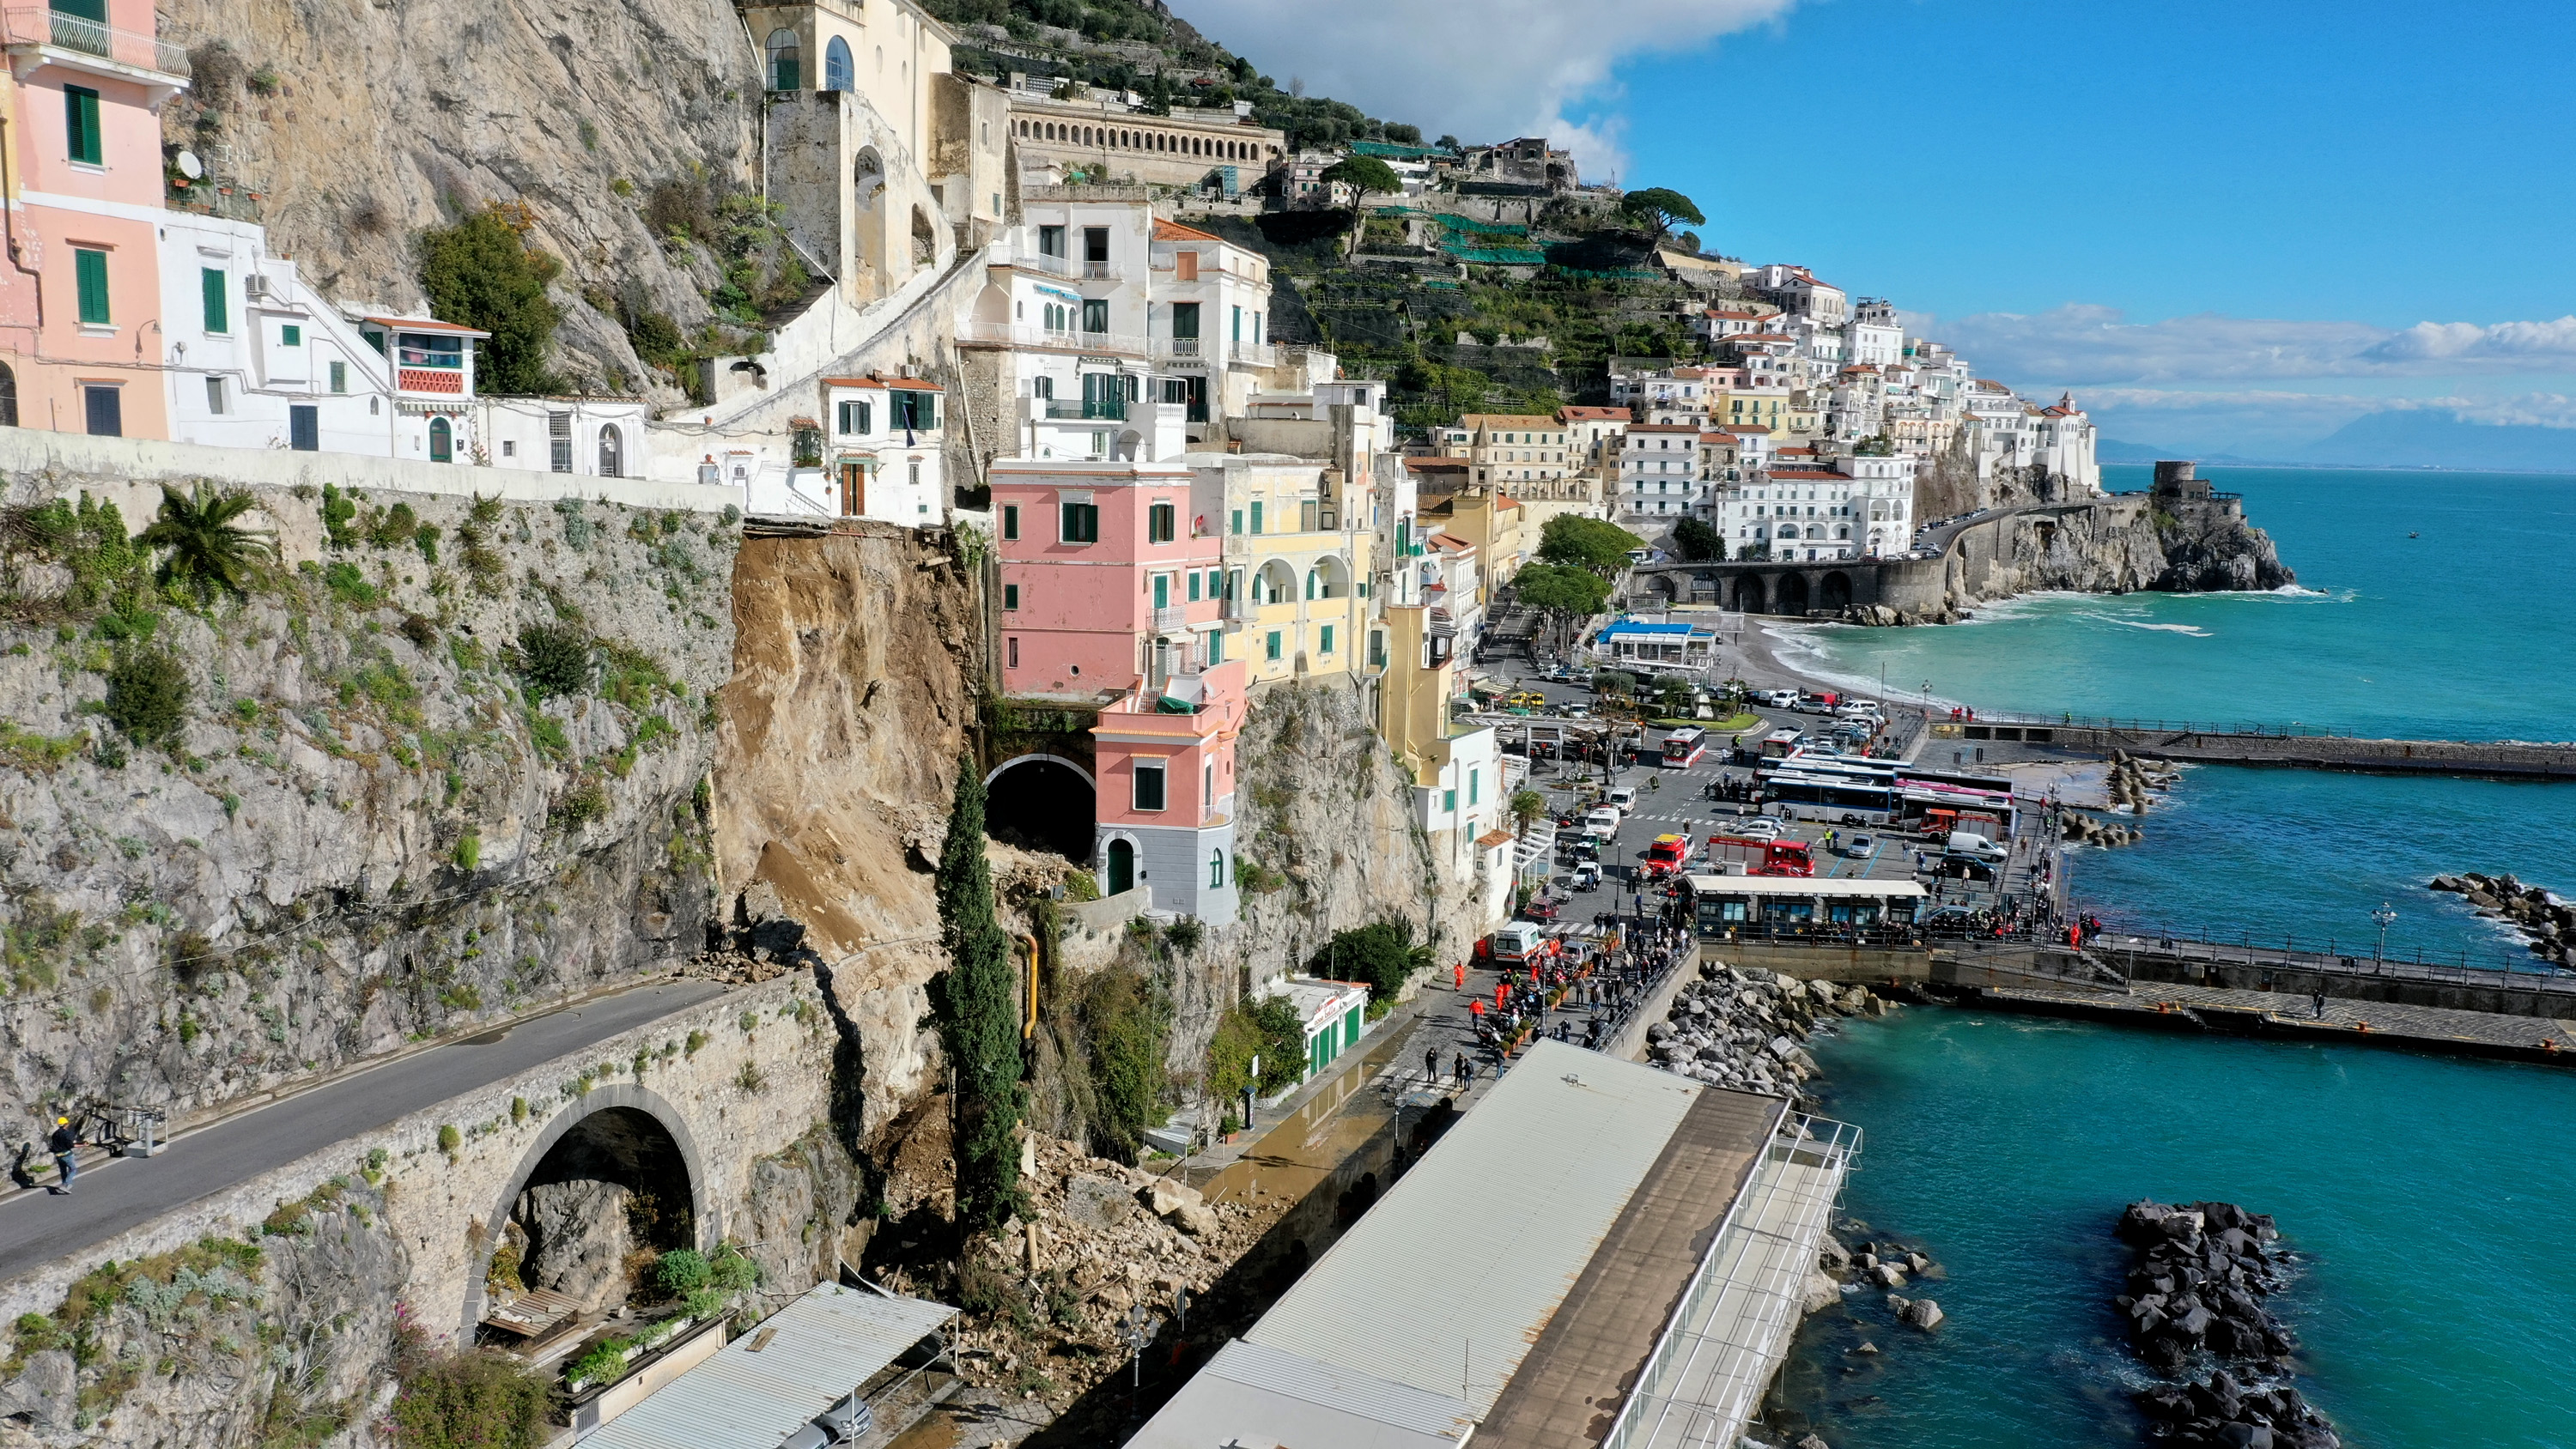 Landslips continue to blight the beautiful Amalfi coast even in modern times